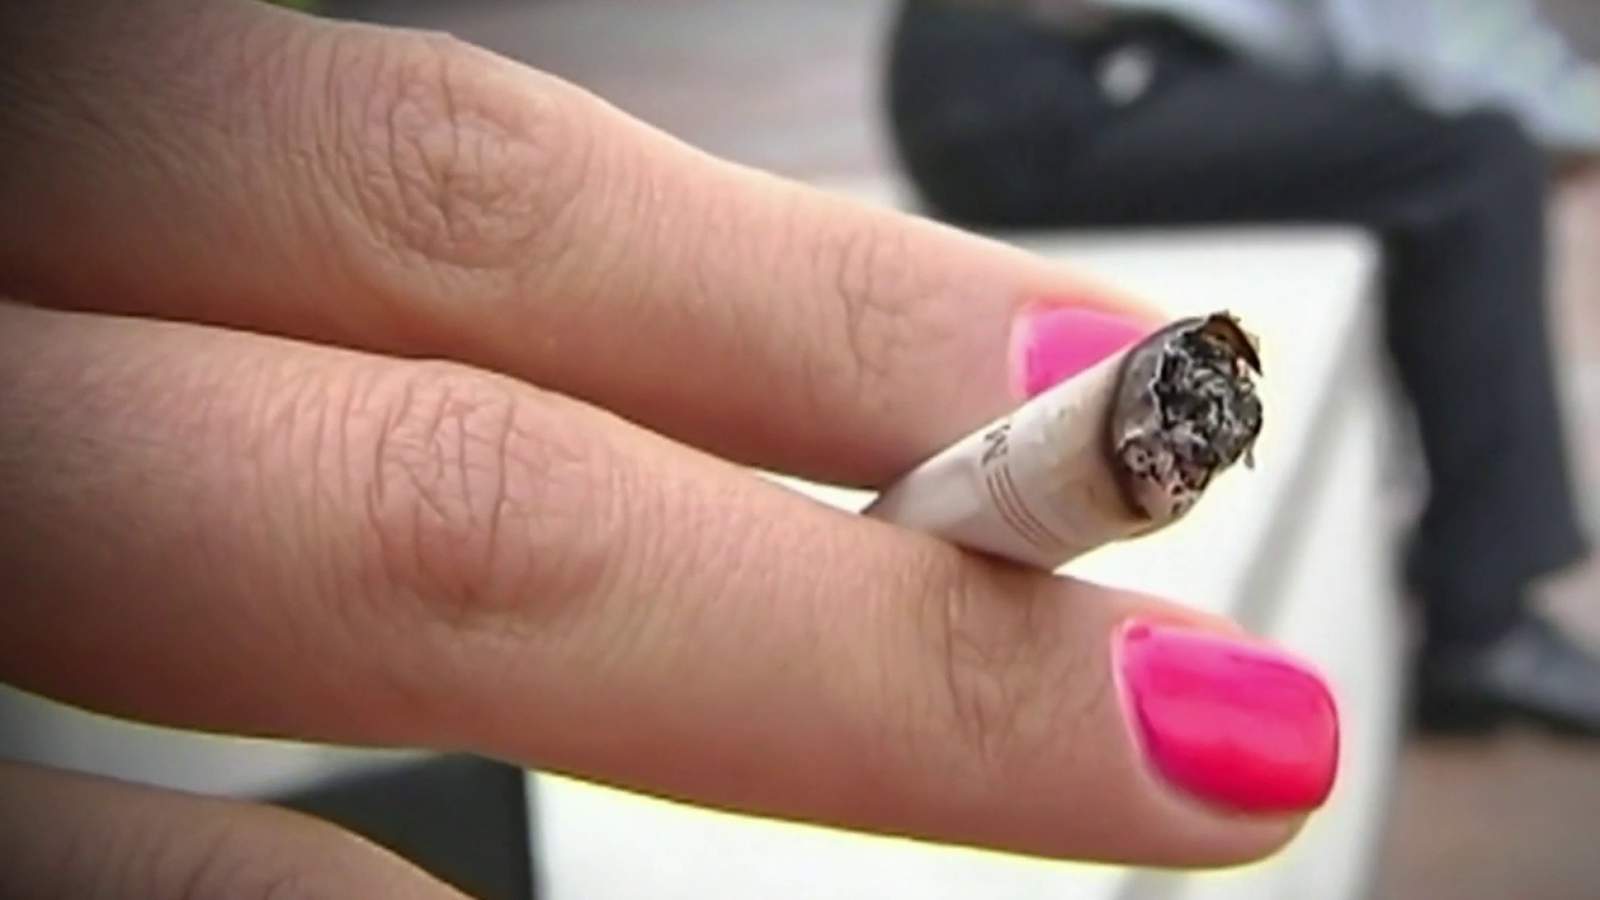 CDC: Teen tobacco use on the rise